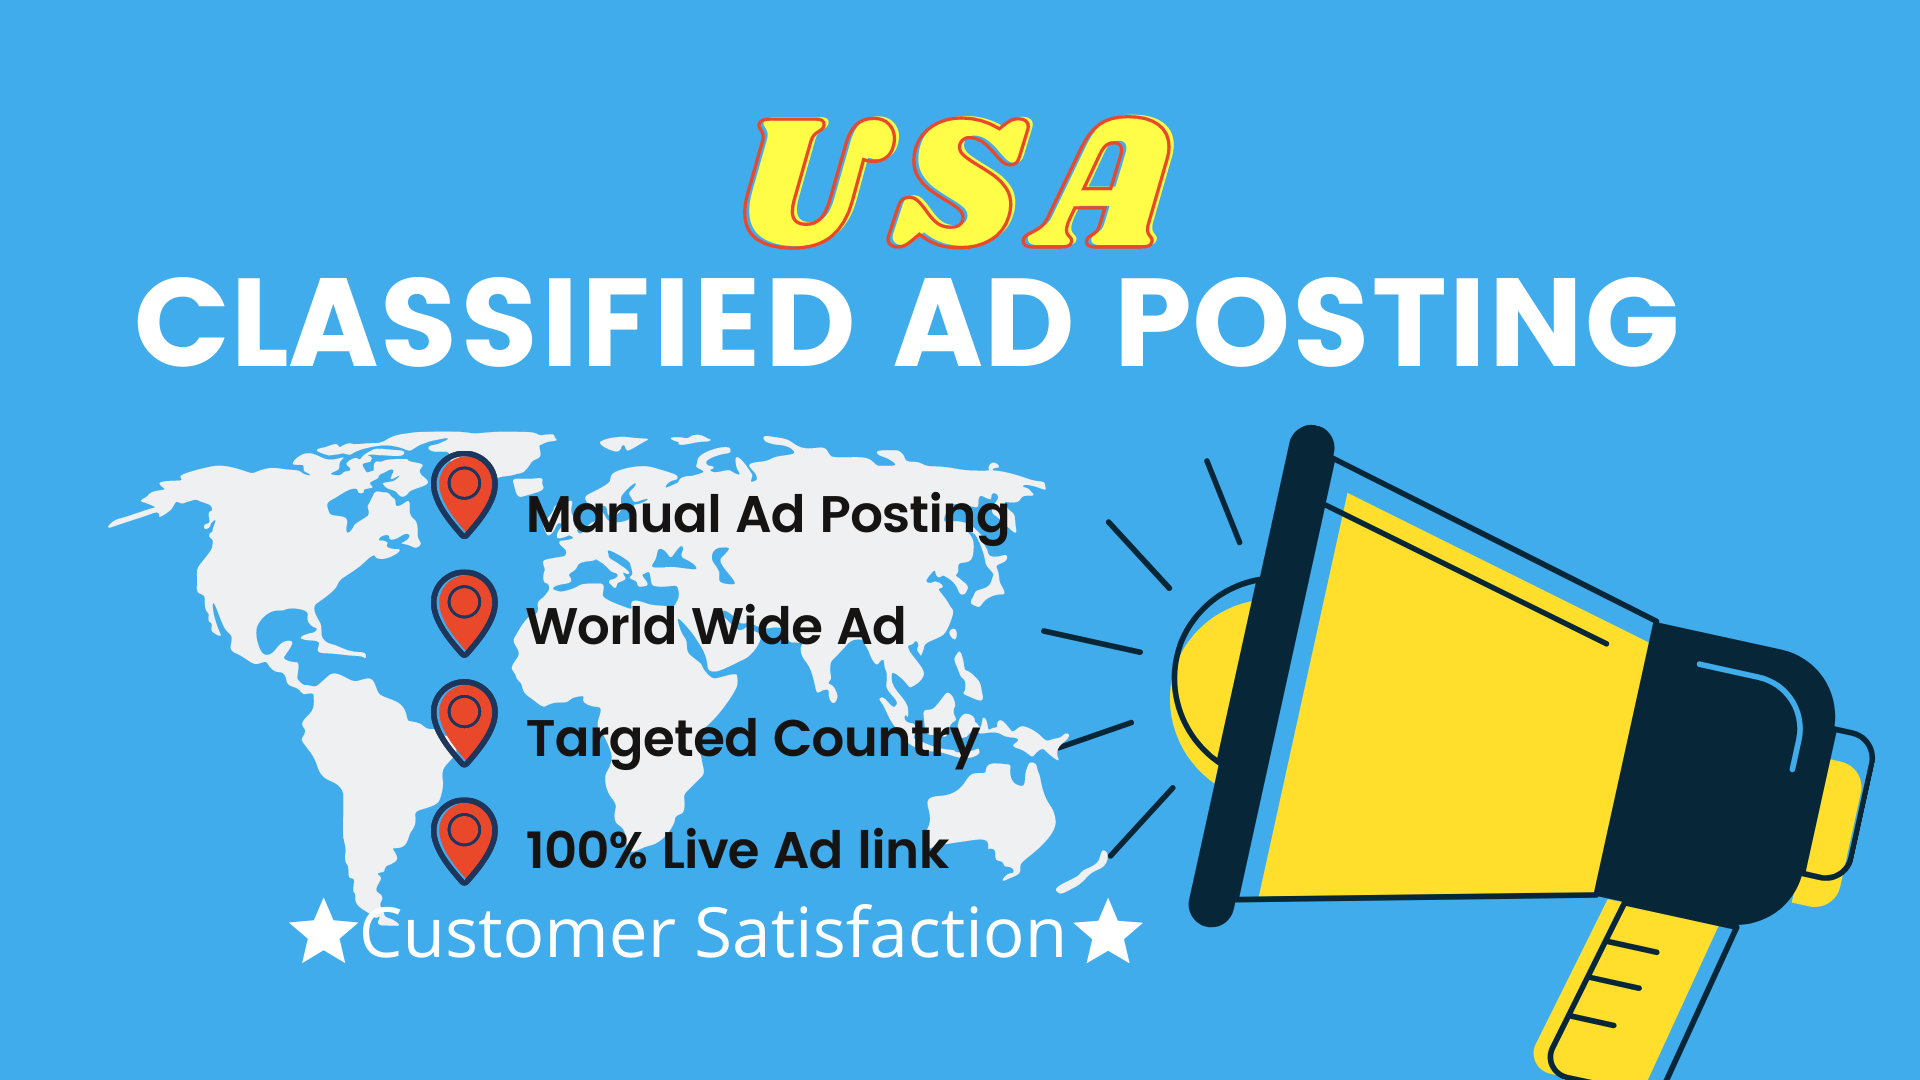 1000 free classified ads site in usa